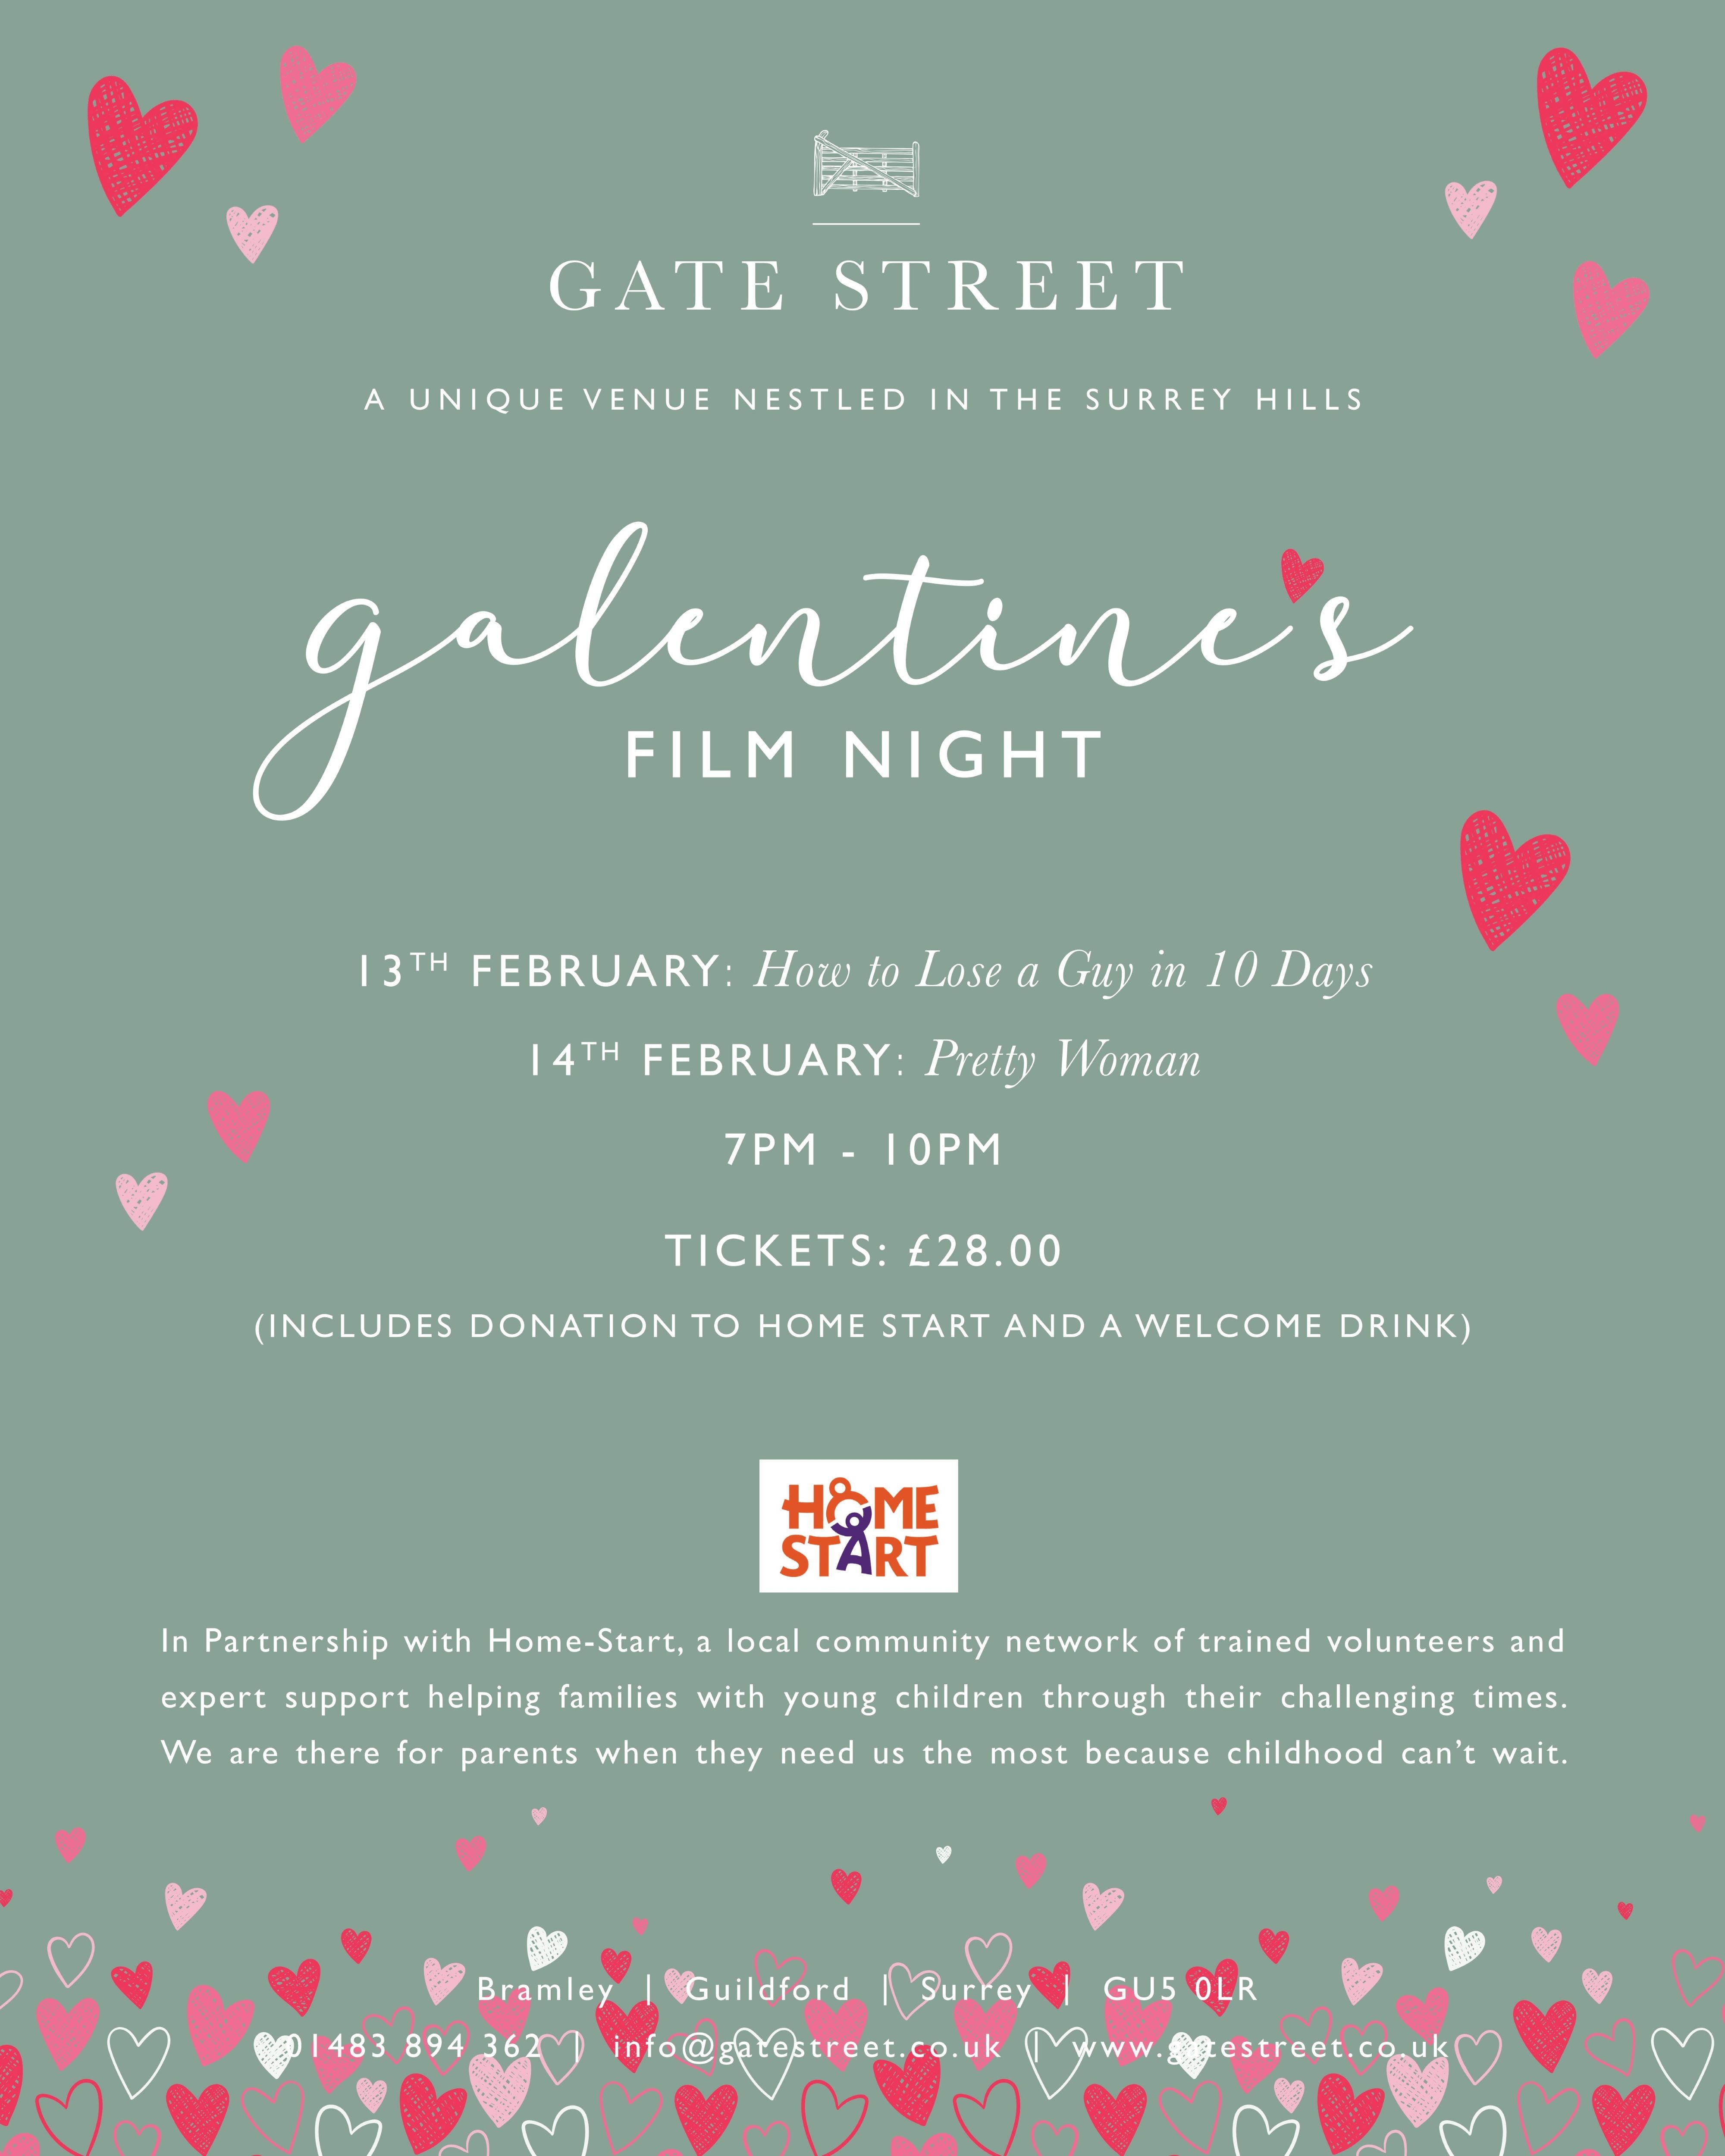 Galentine's Film Night | 13th February - How to Lose a Guy in 10 Days